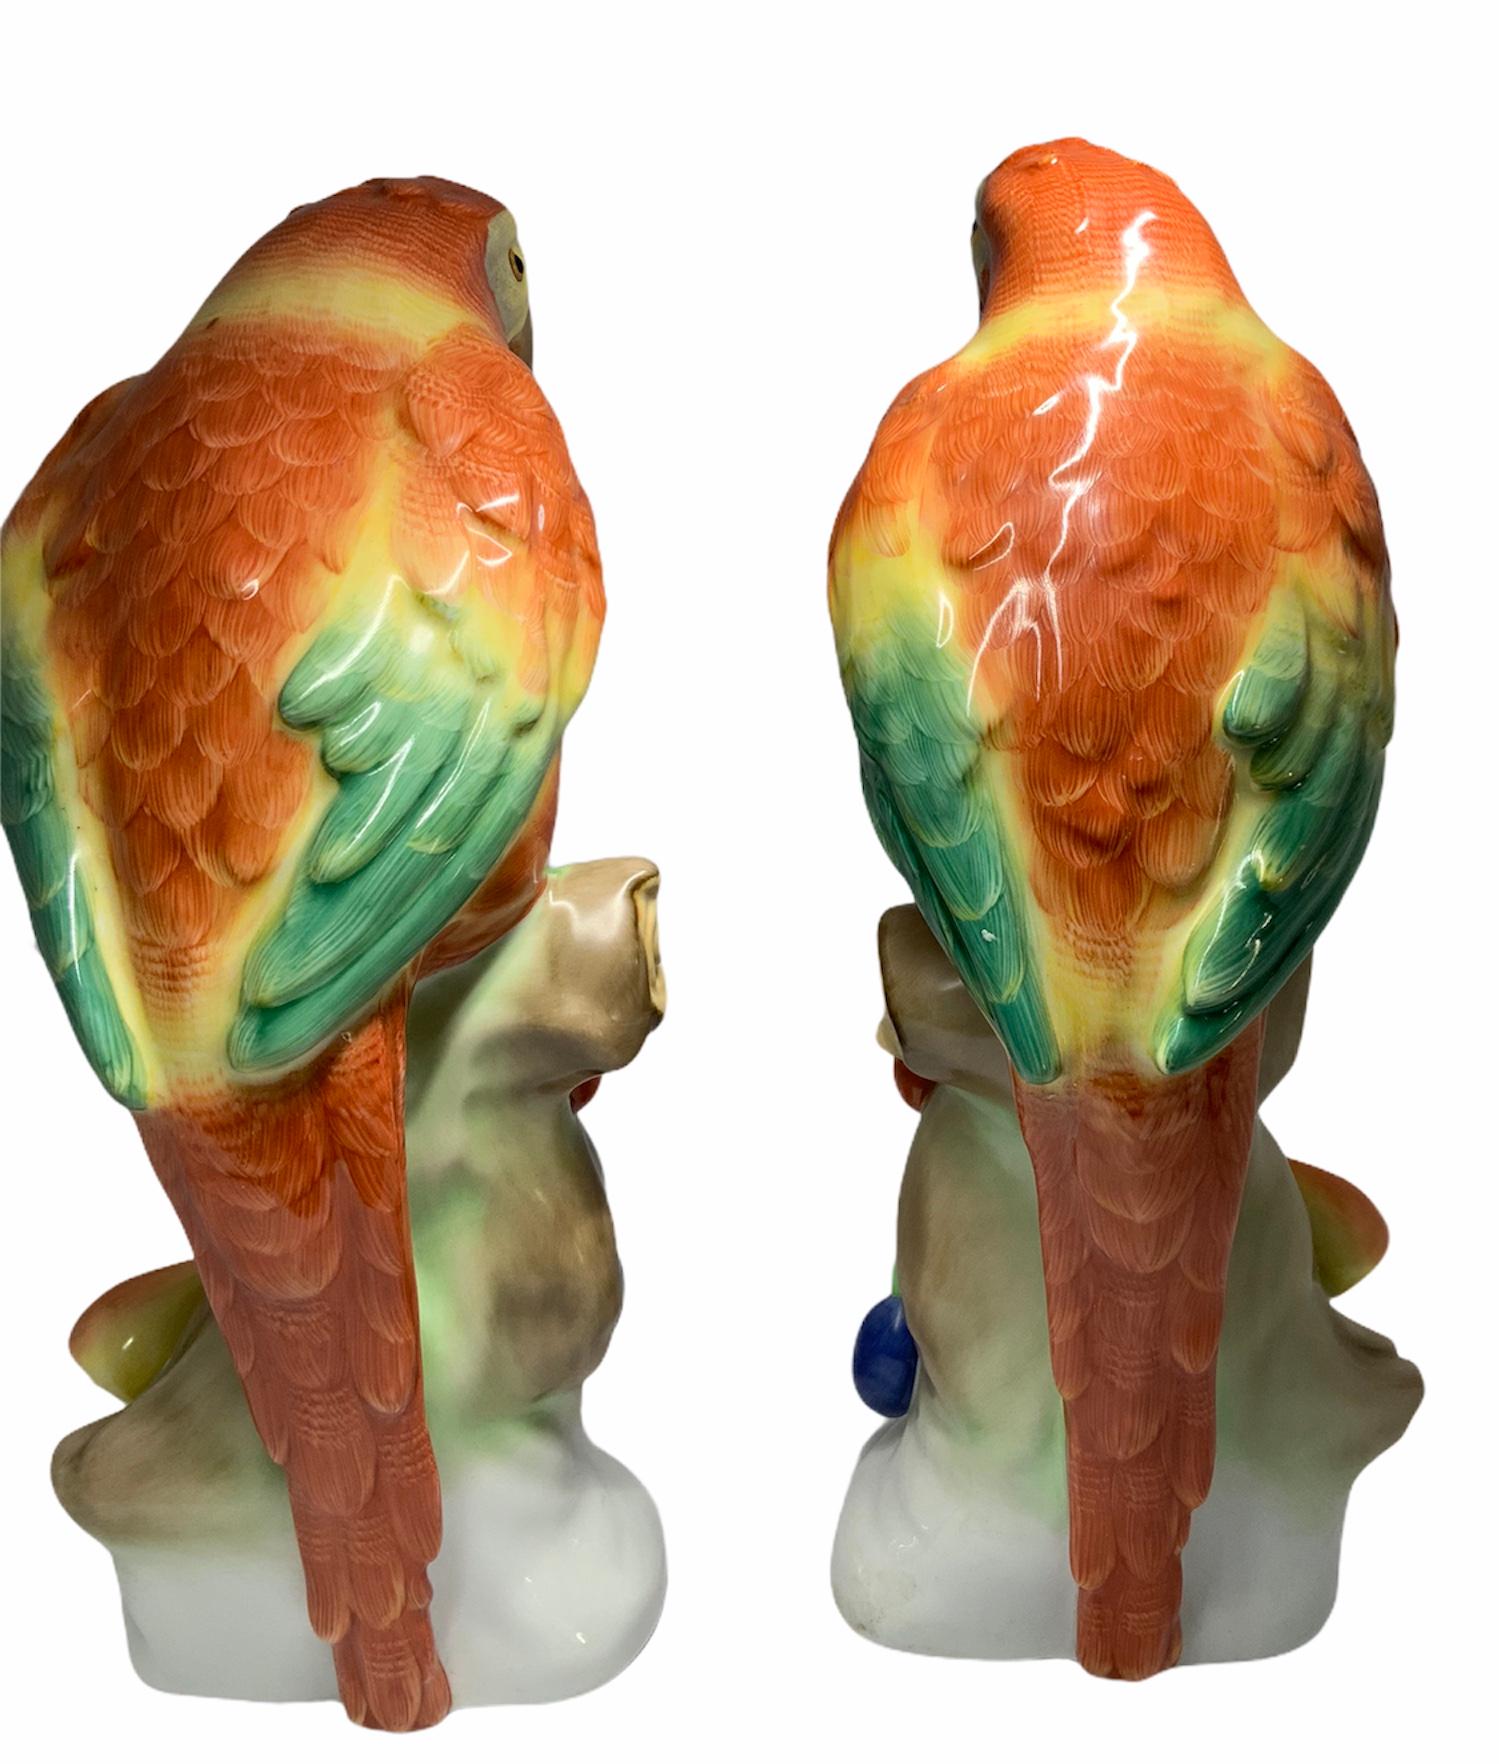 20th Century Herend Porcelain Pair of Parrots Figurines